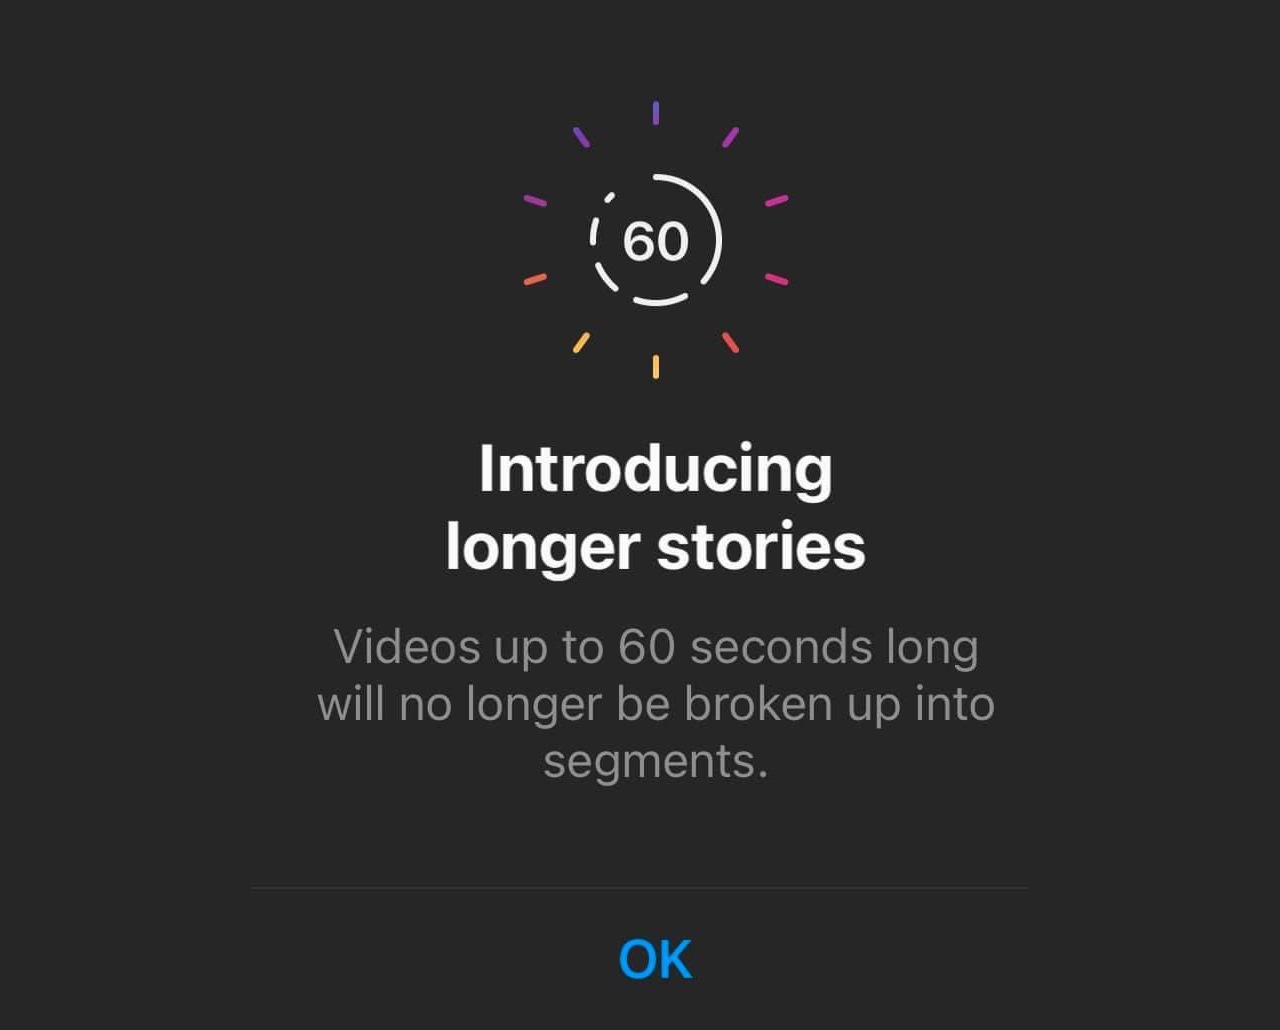 Instagram test 60-second Stories as they continue to streamline the video experience